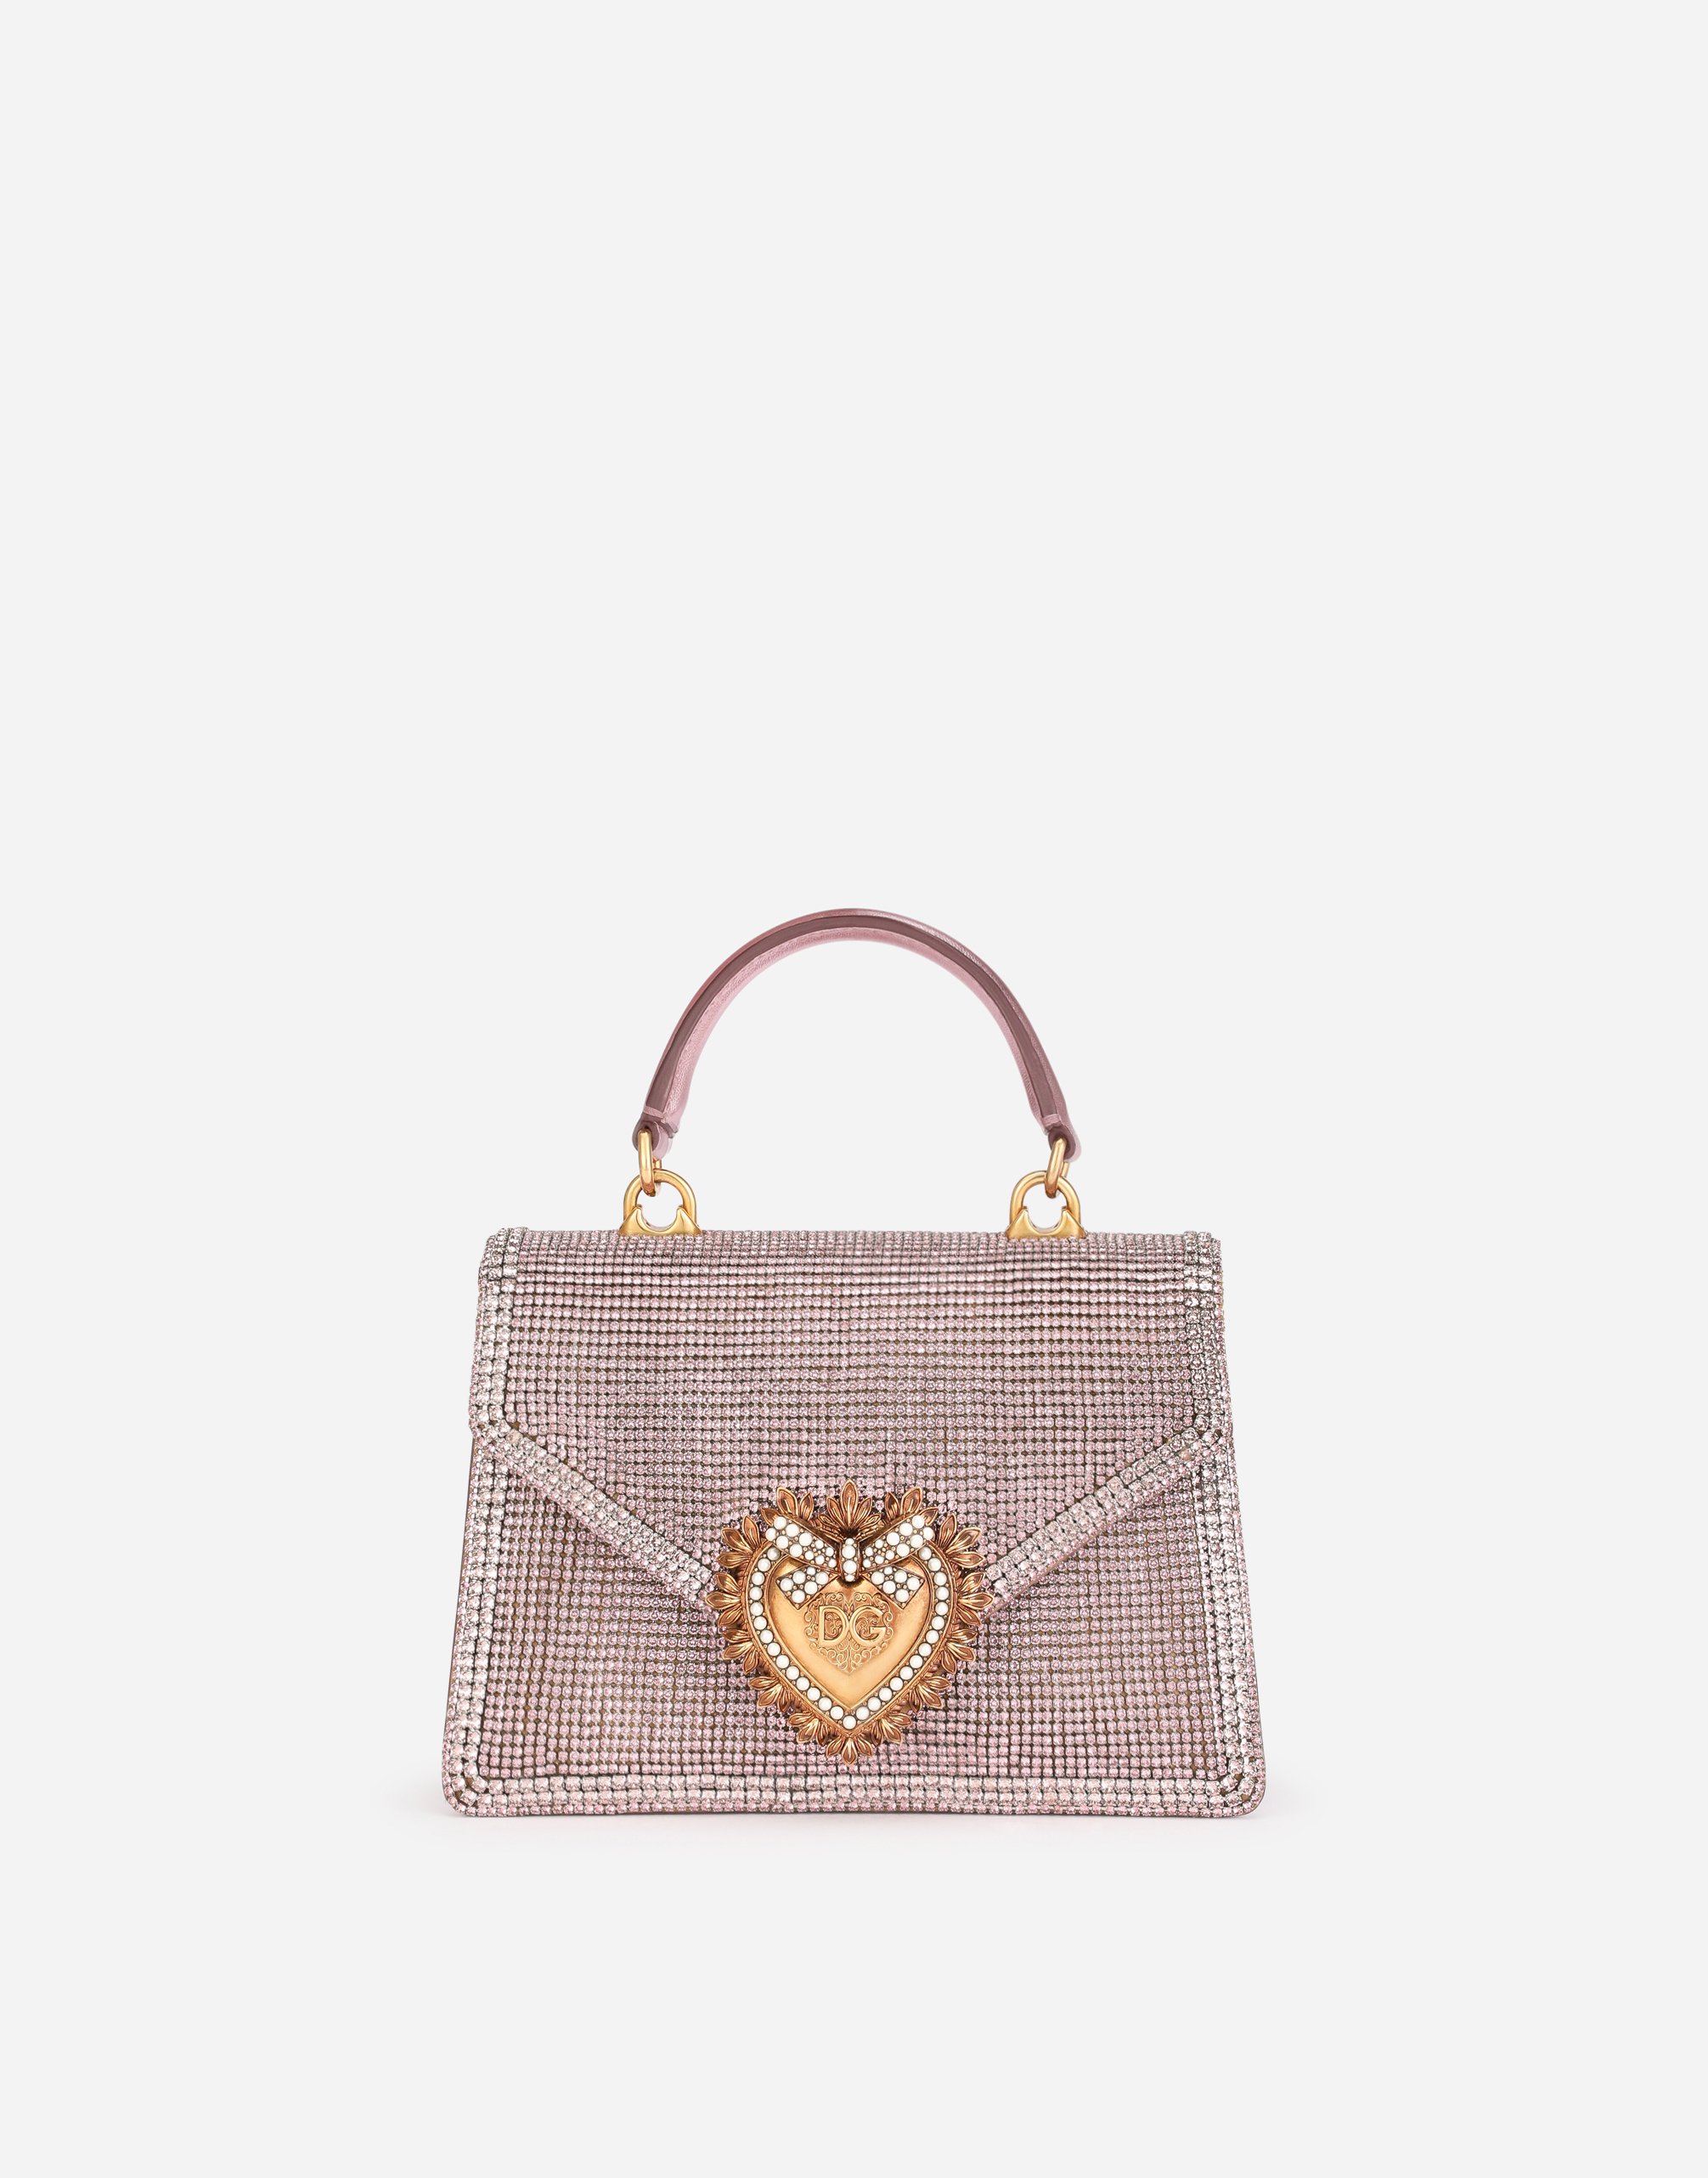 Small Devotion bag in mordore nappa leather with rhinestone detailing in Pink